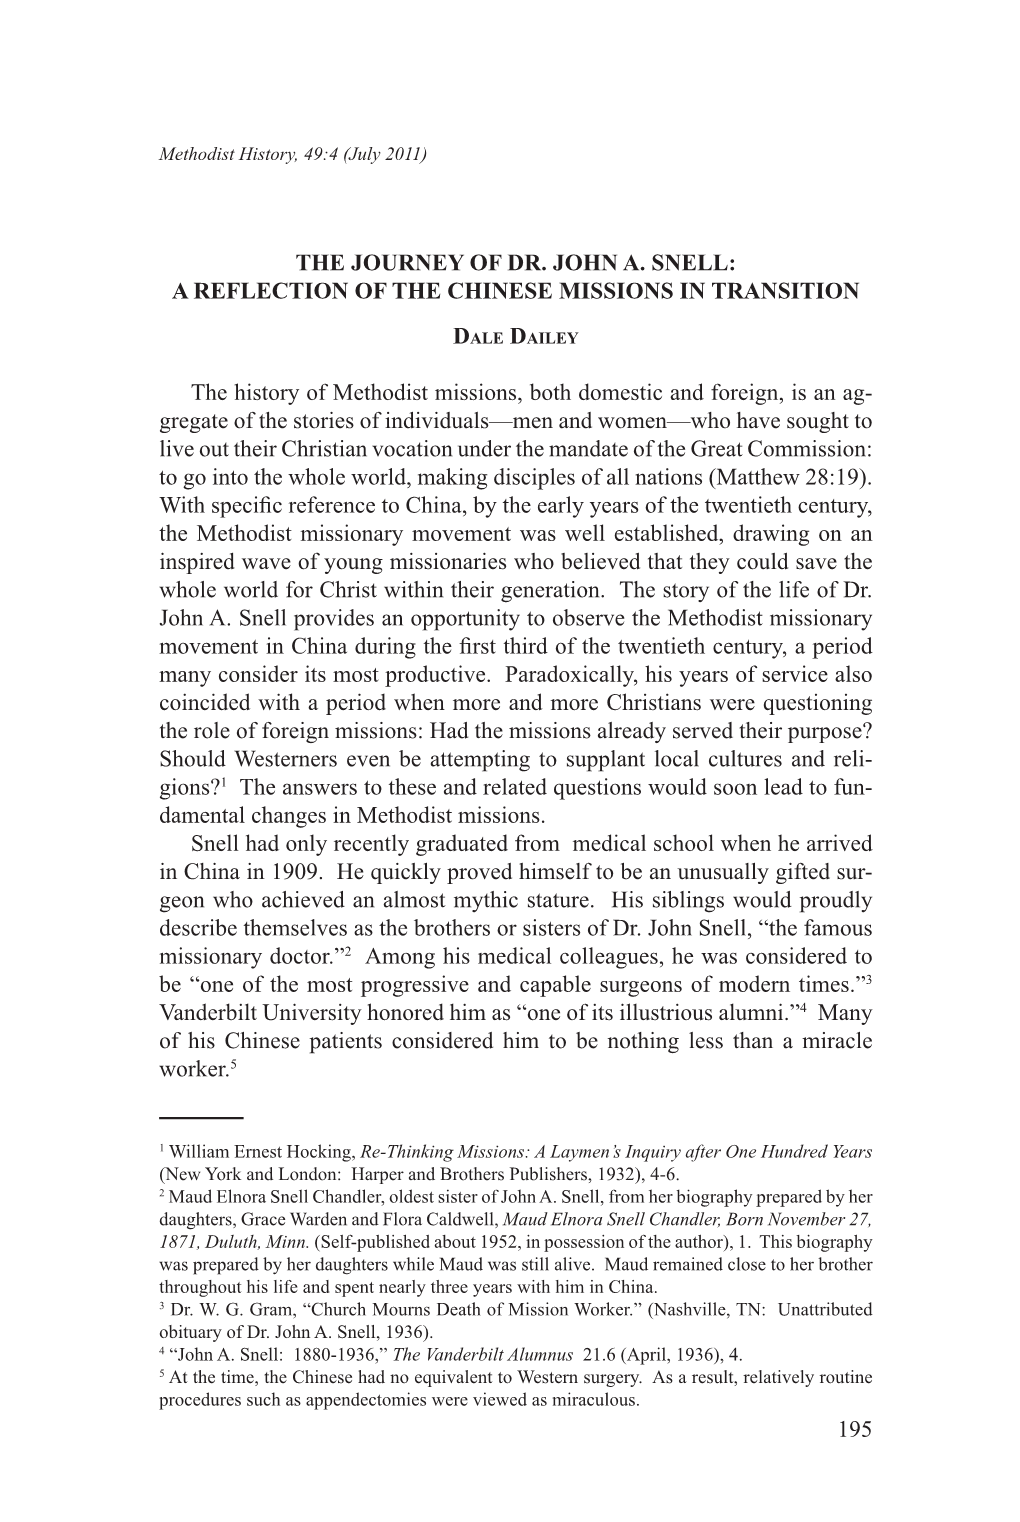 The Journey of Dr. John A. Snell: a Reflection of the Chinese Missions in Transition